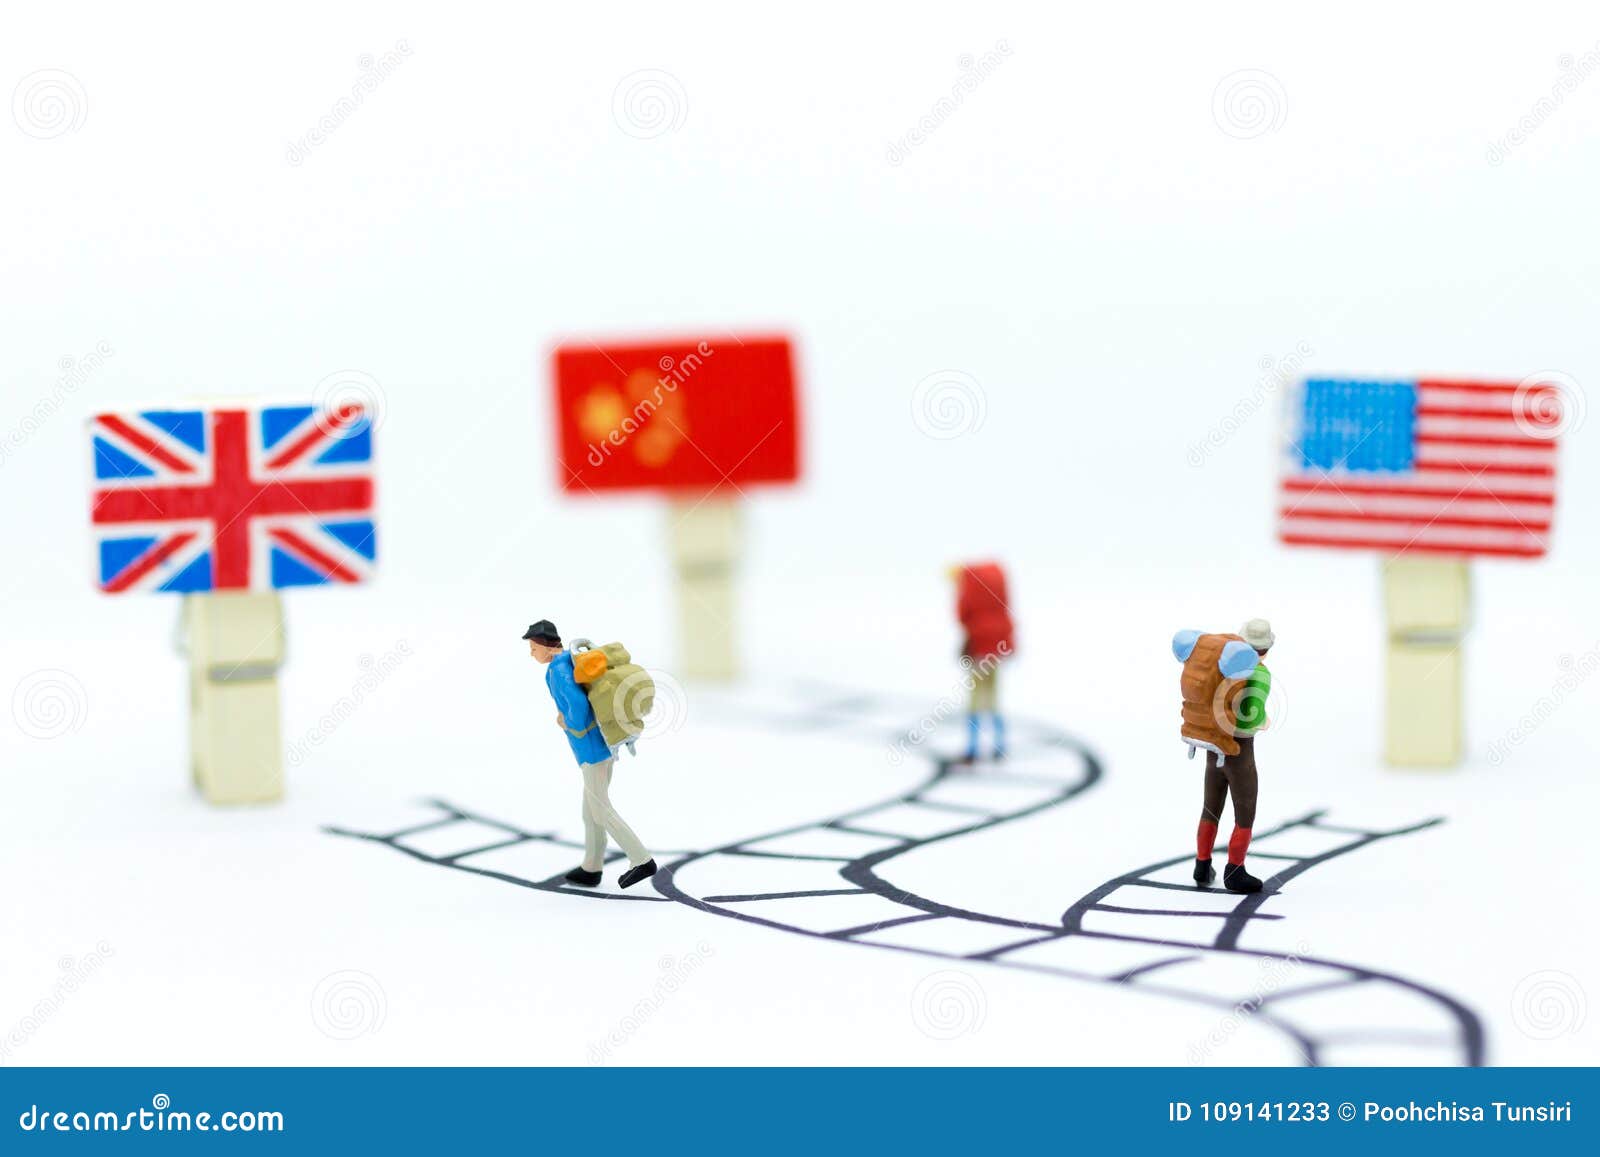 miniature people: travelers go to the oversea. image use for traveling abroad, business concept